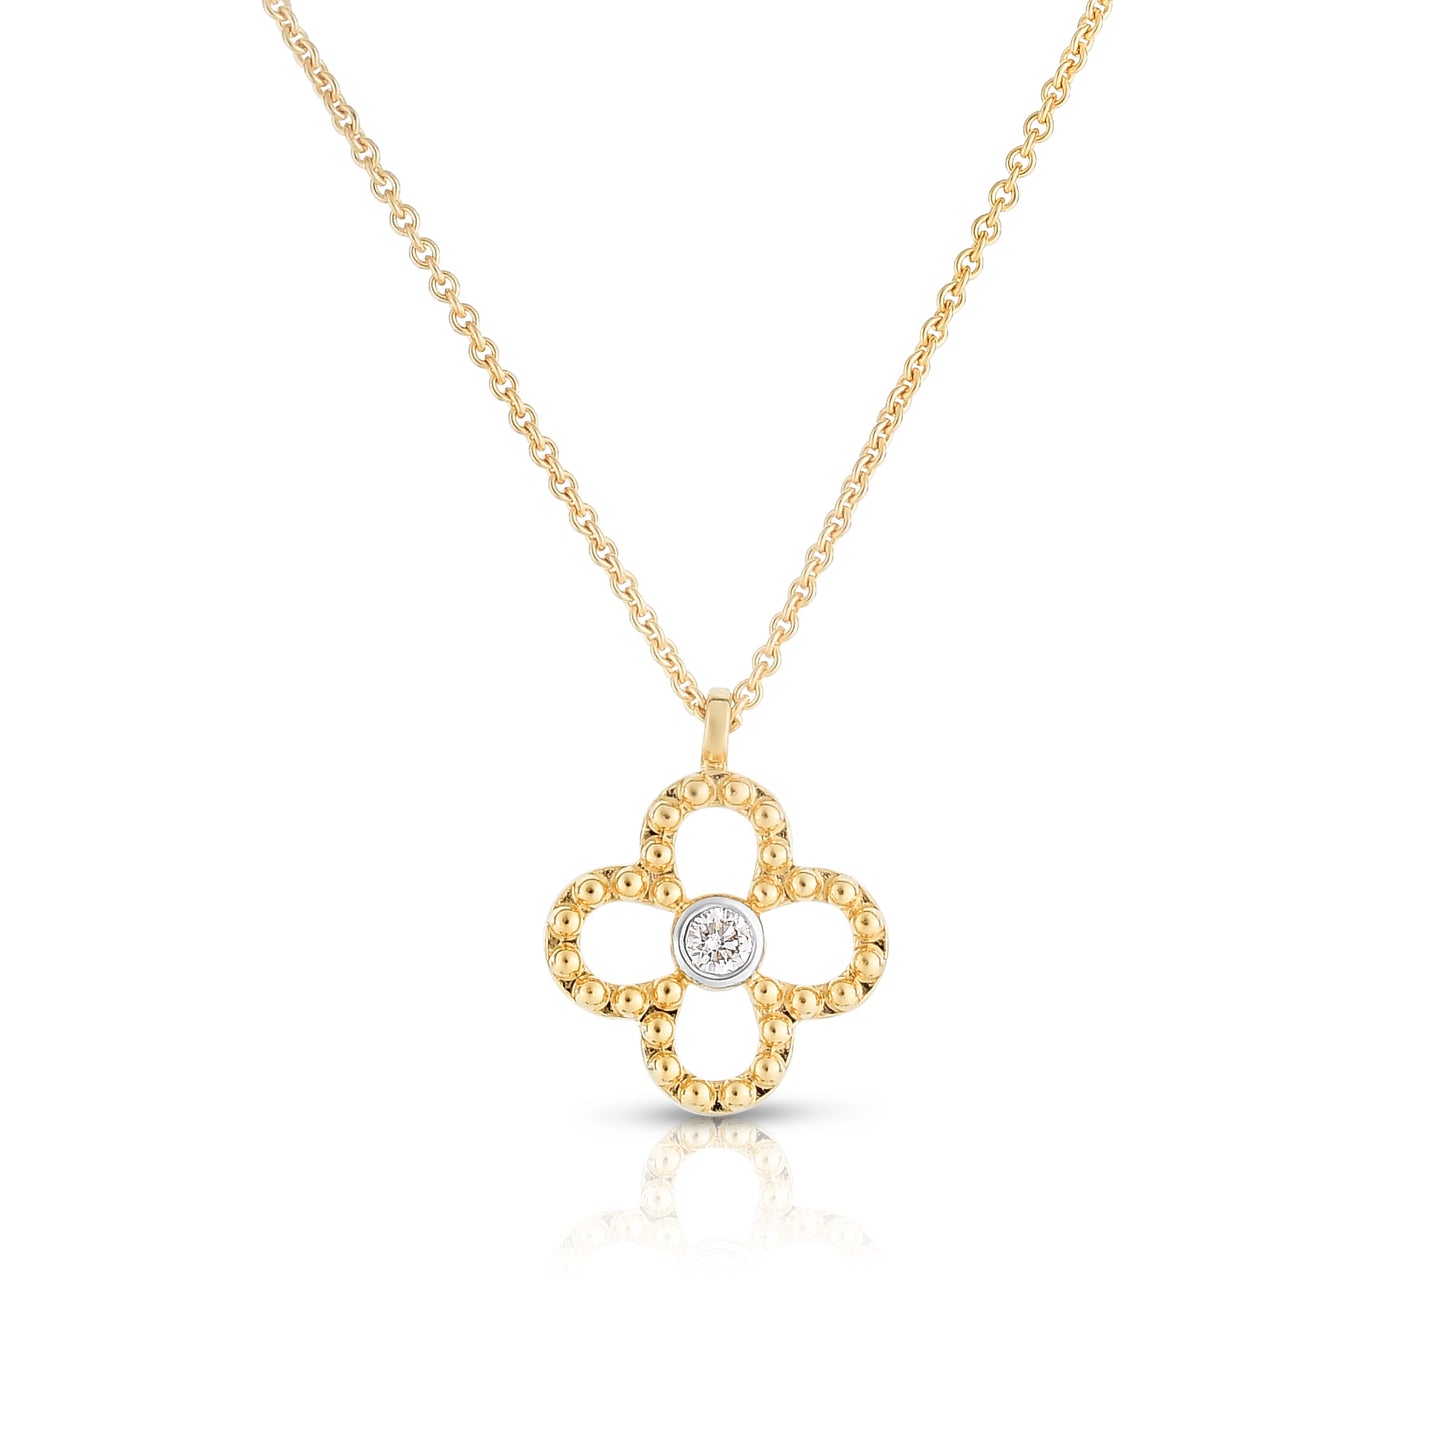 Sabel Collection 14K Yellow Gold Clover Necklace with Diamond